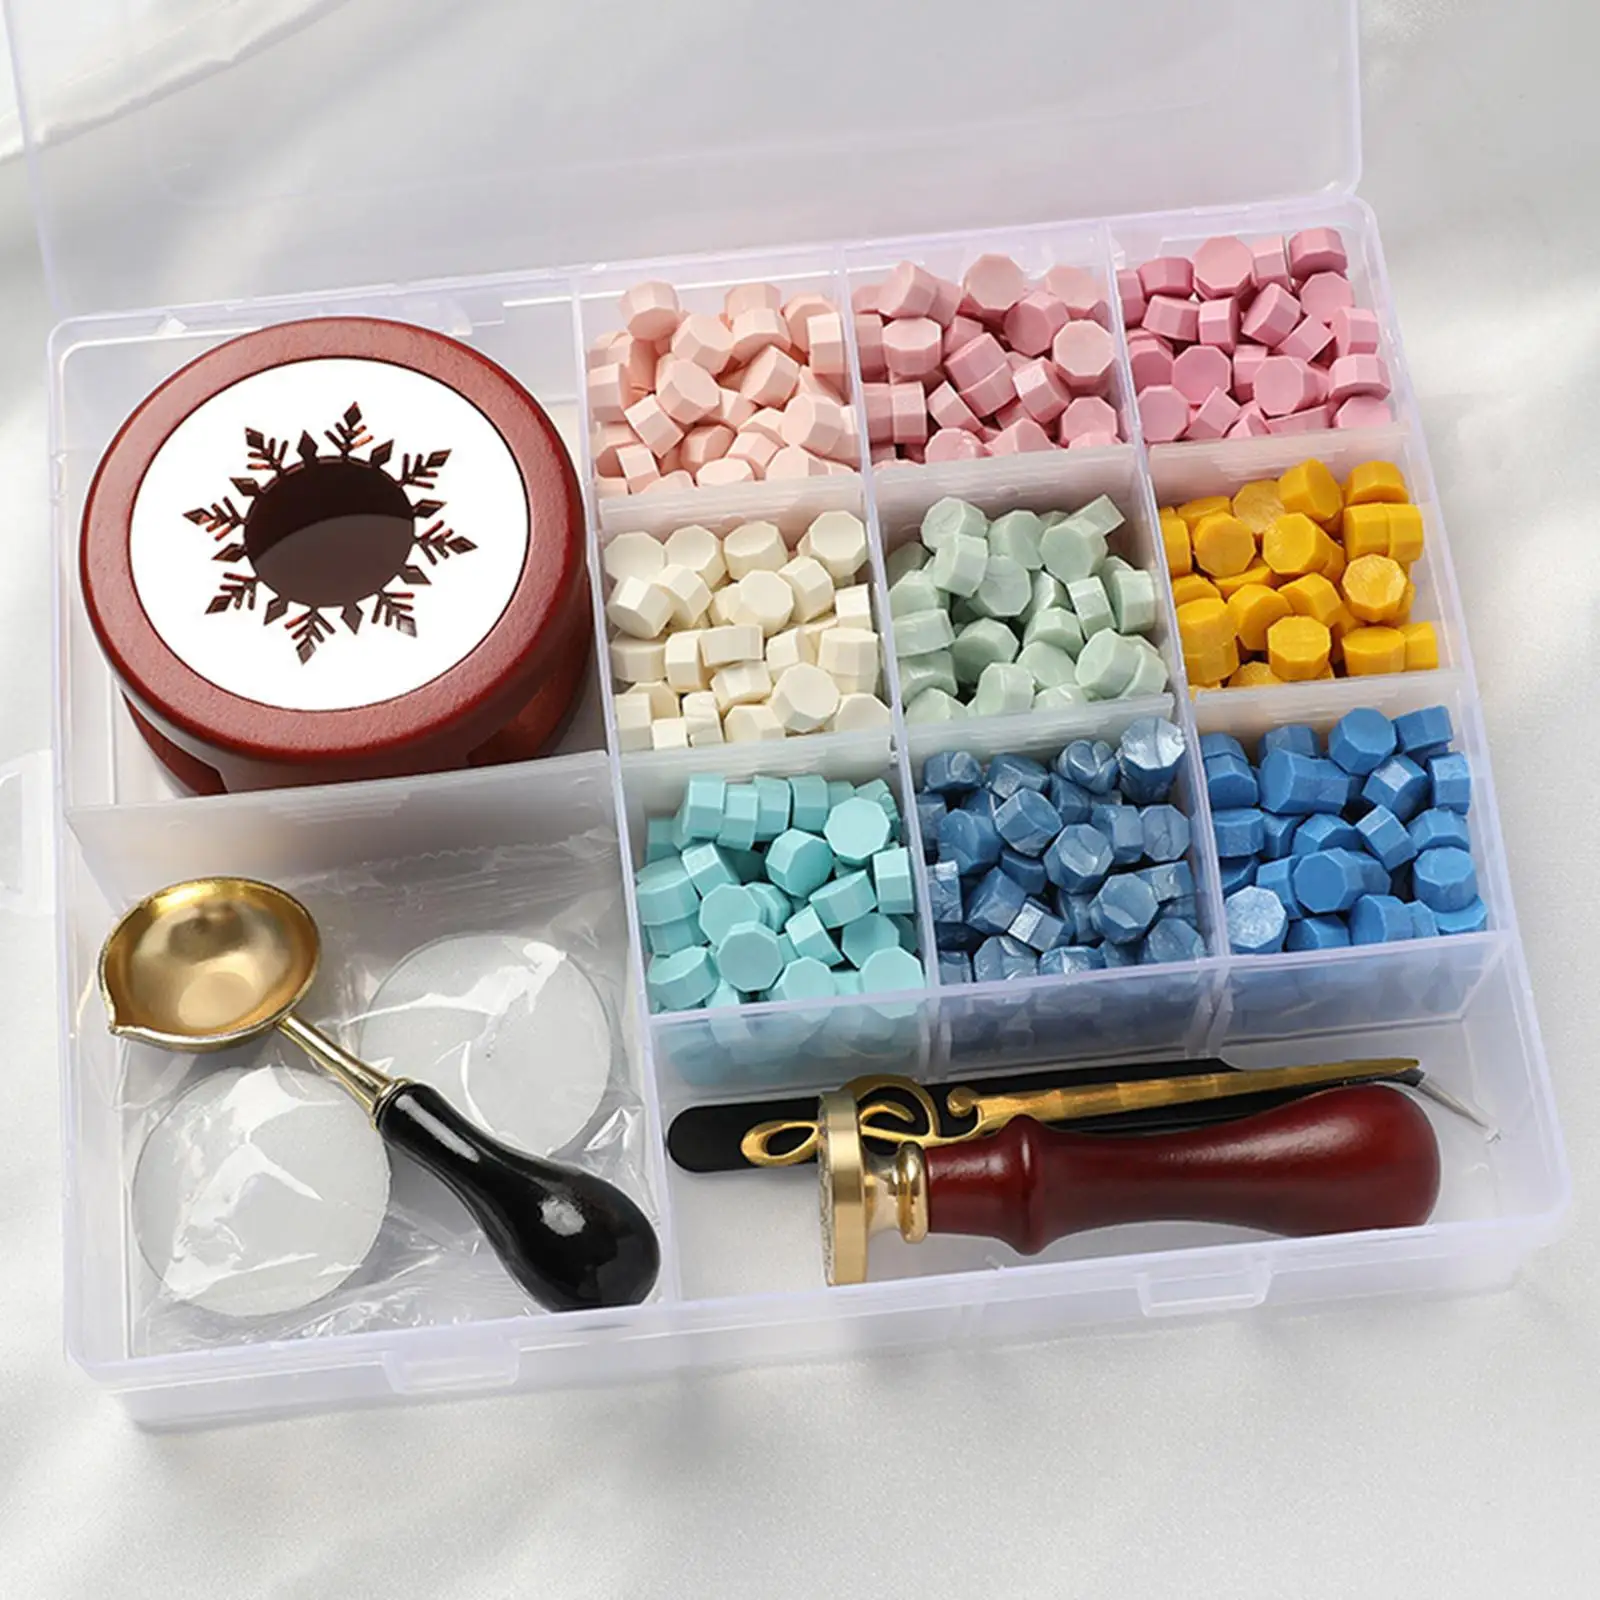 Wax Seal Kit Sealing Wax Warmer Tealight Candles Wax Letter Seal Kit for Invitations Crafts